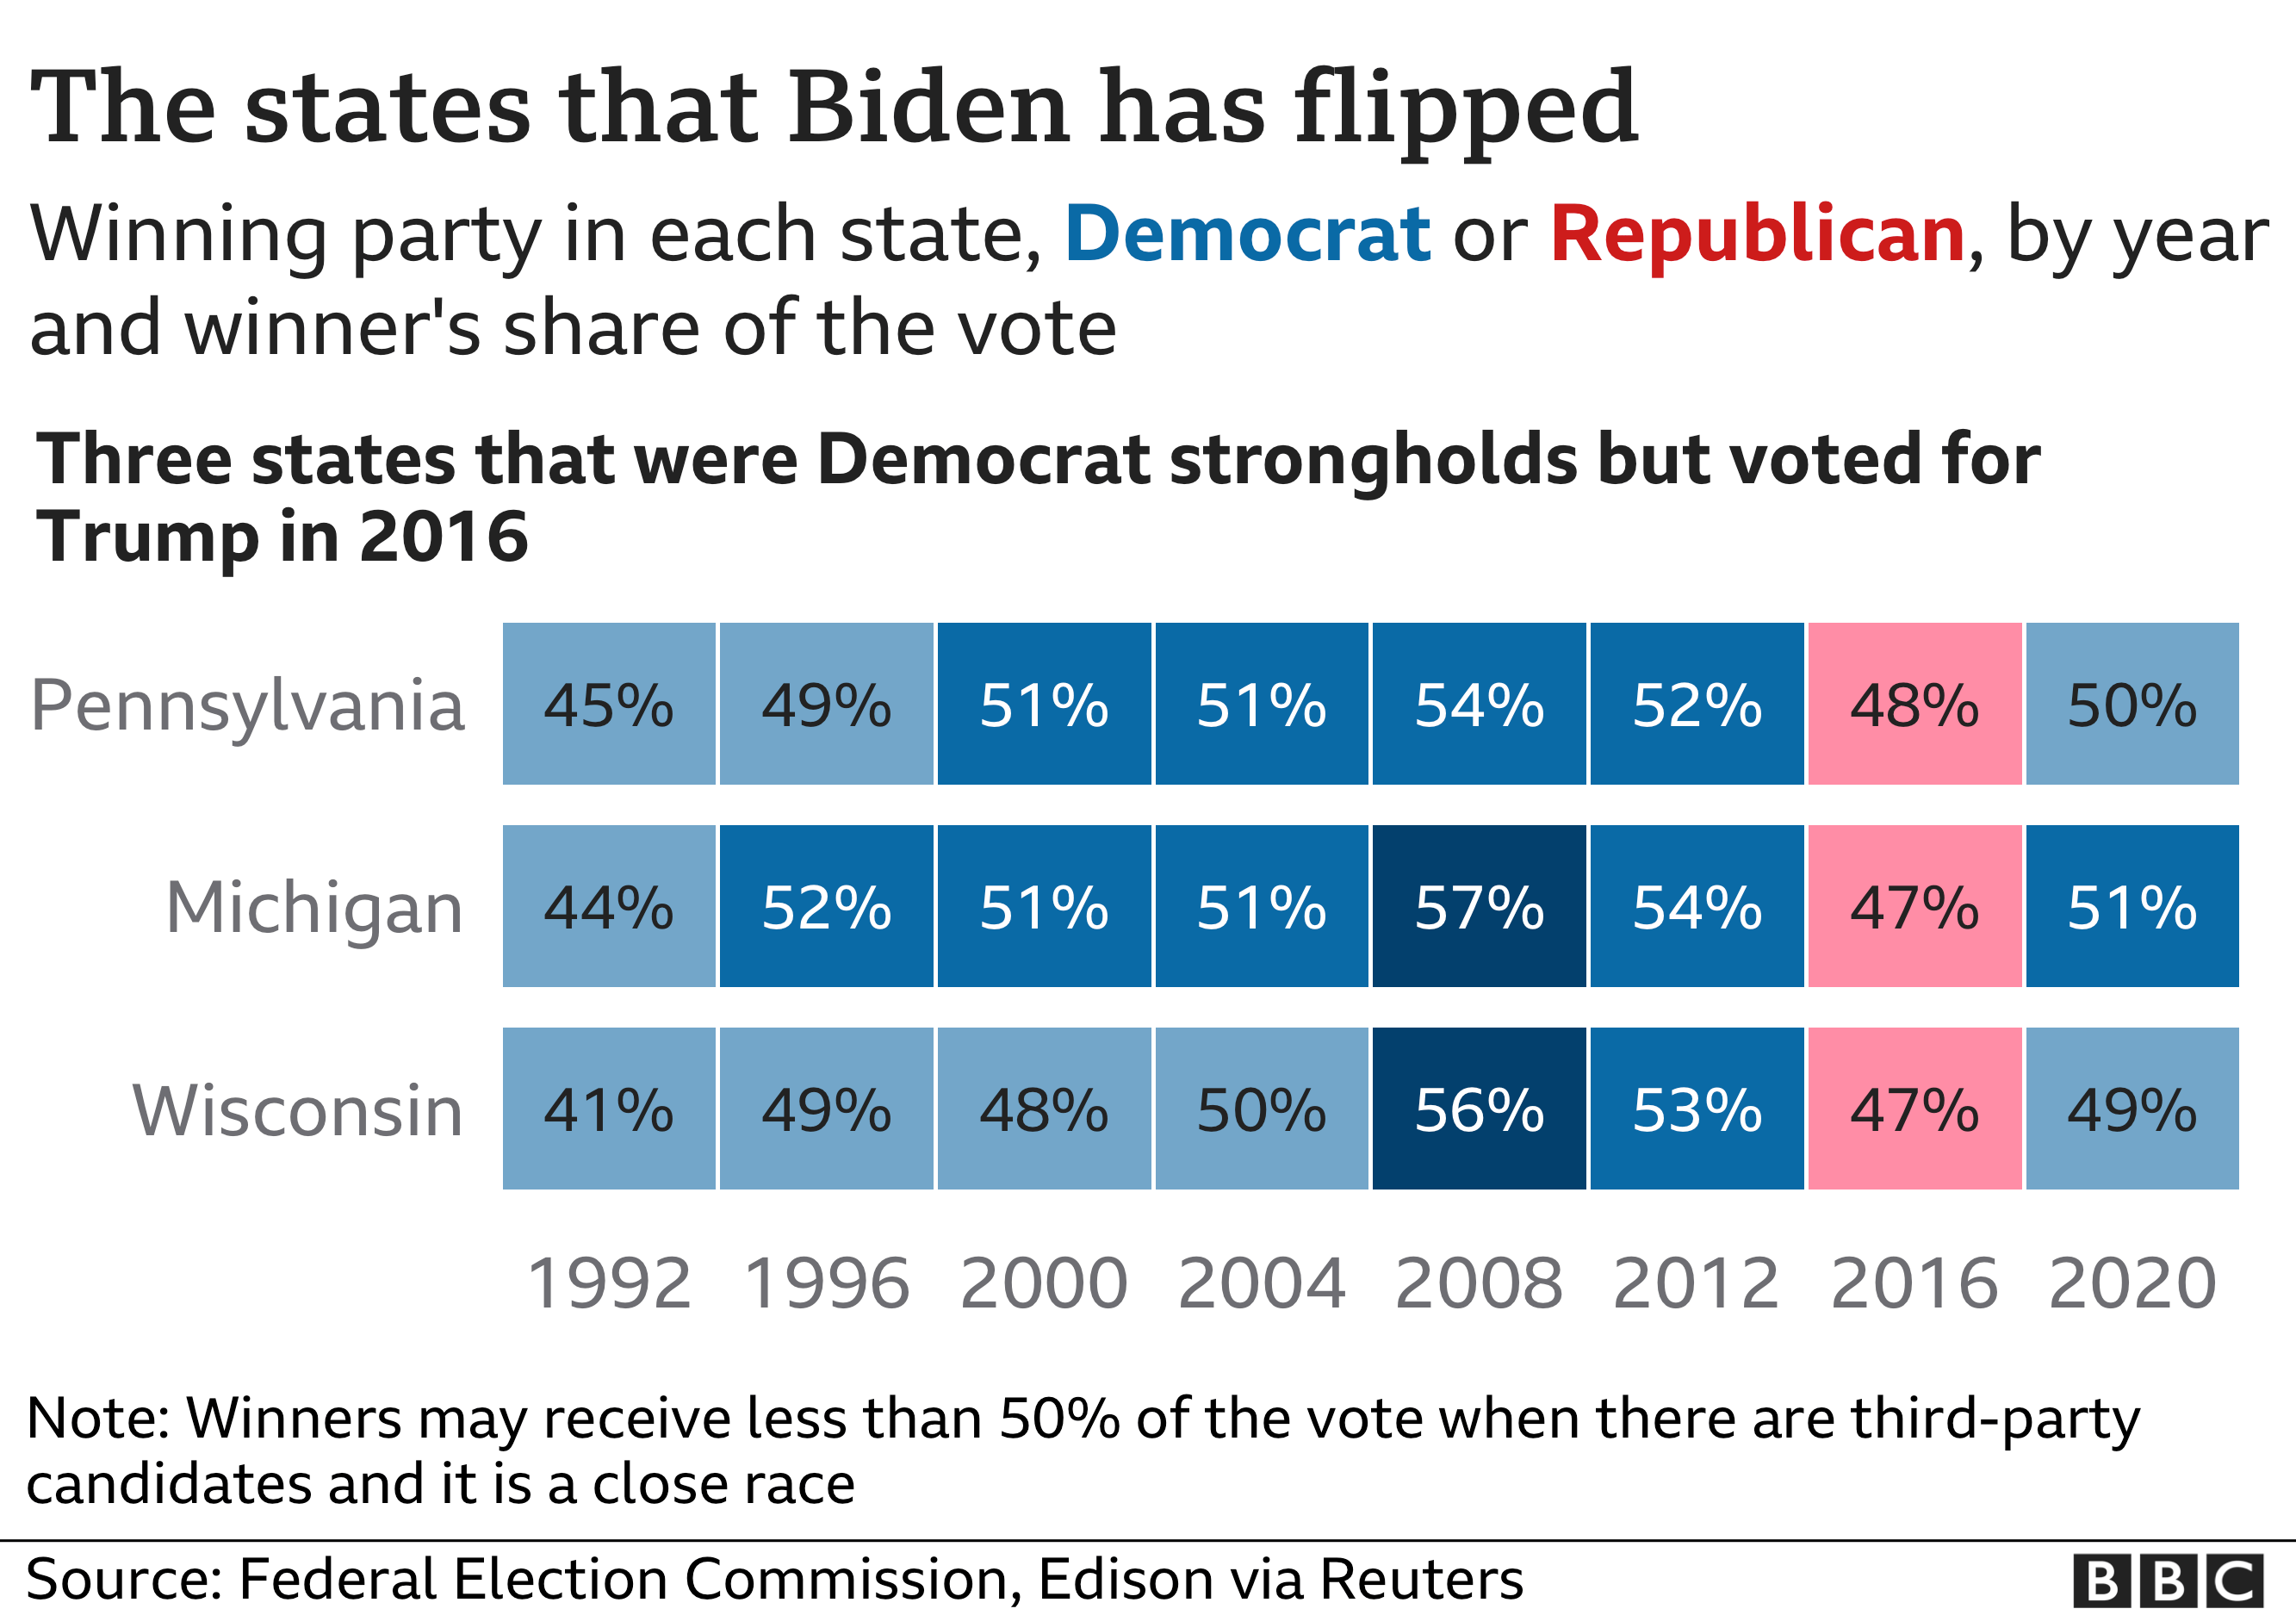 Time series chart showing election data for states that Biden has won from Trump